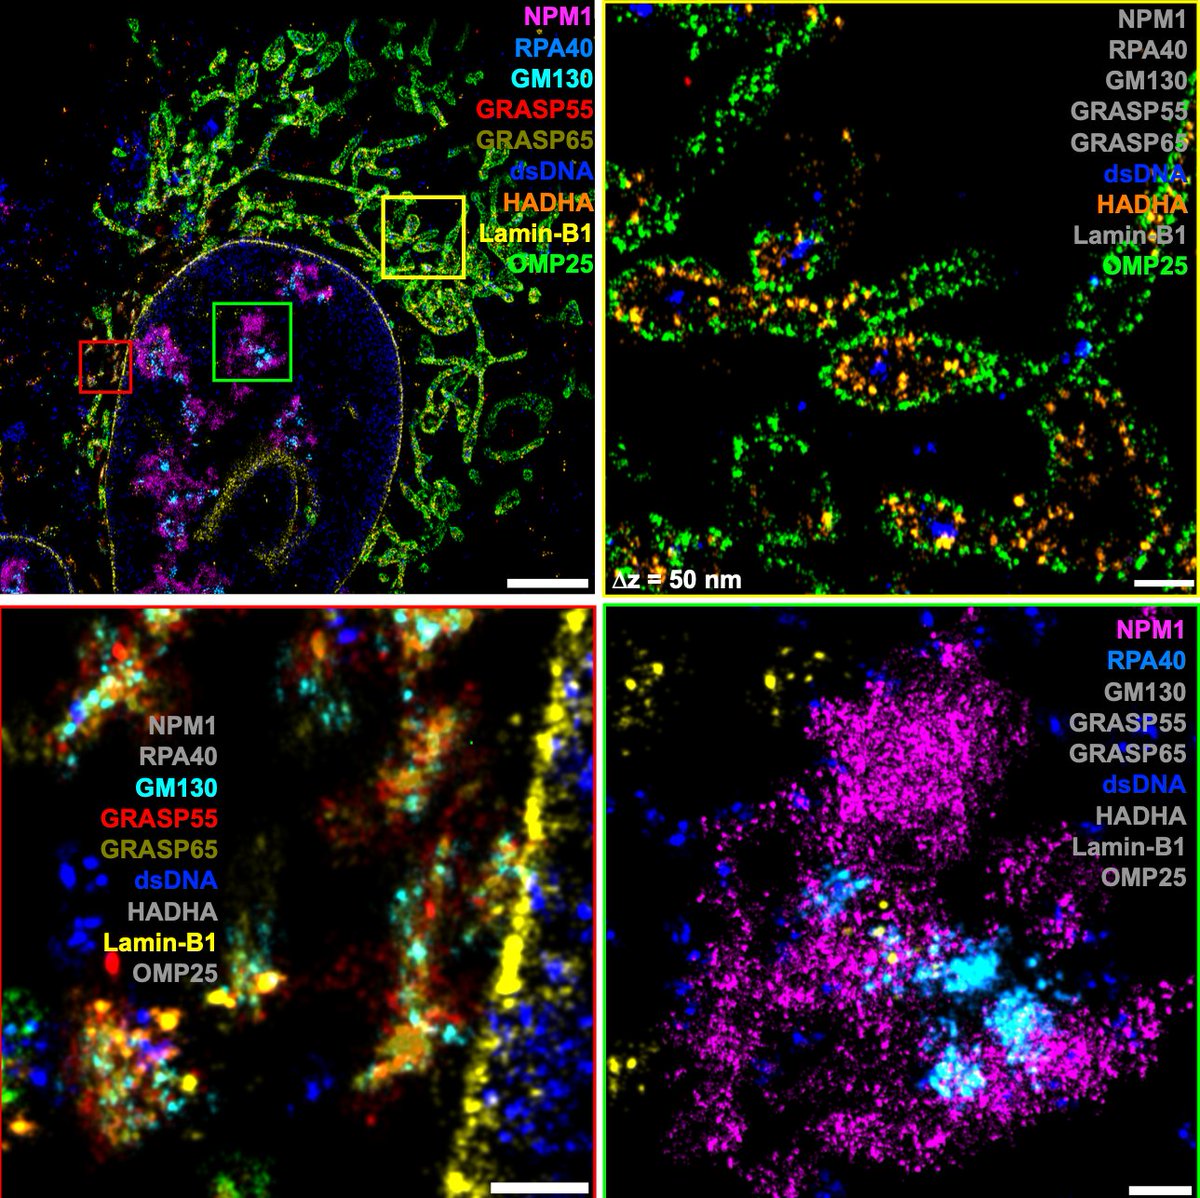 Please check out our latest work about: Unraveling cellular complexity with unlimited multiplexed super-resolution imaging. #FLASHPAINT #DNAPAINT @YaleMed @YaleCellBio @bewersdorflab biorxiv.org/content/10.110…